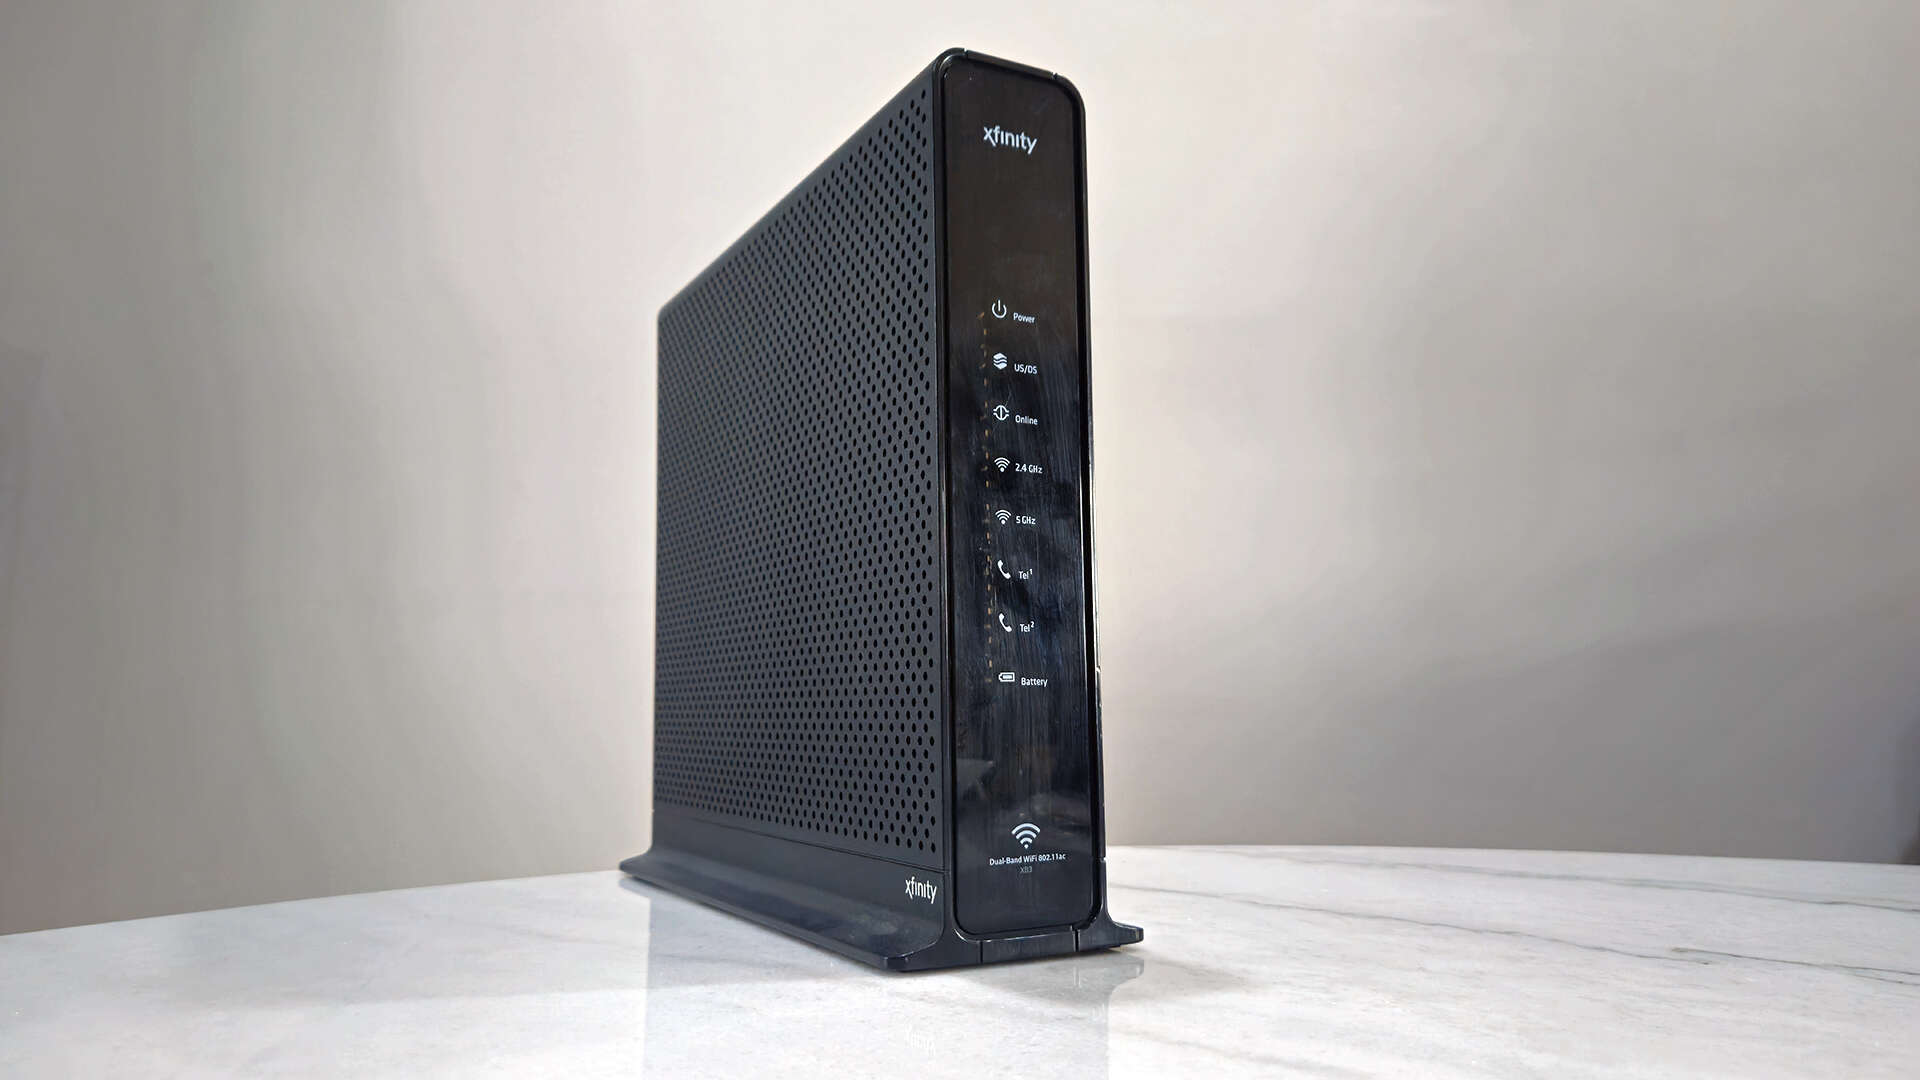 Picture of an Xfinity DOCSIS 3.0 modem